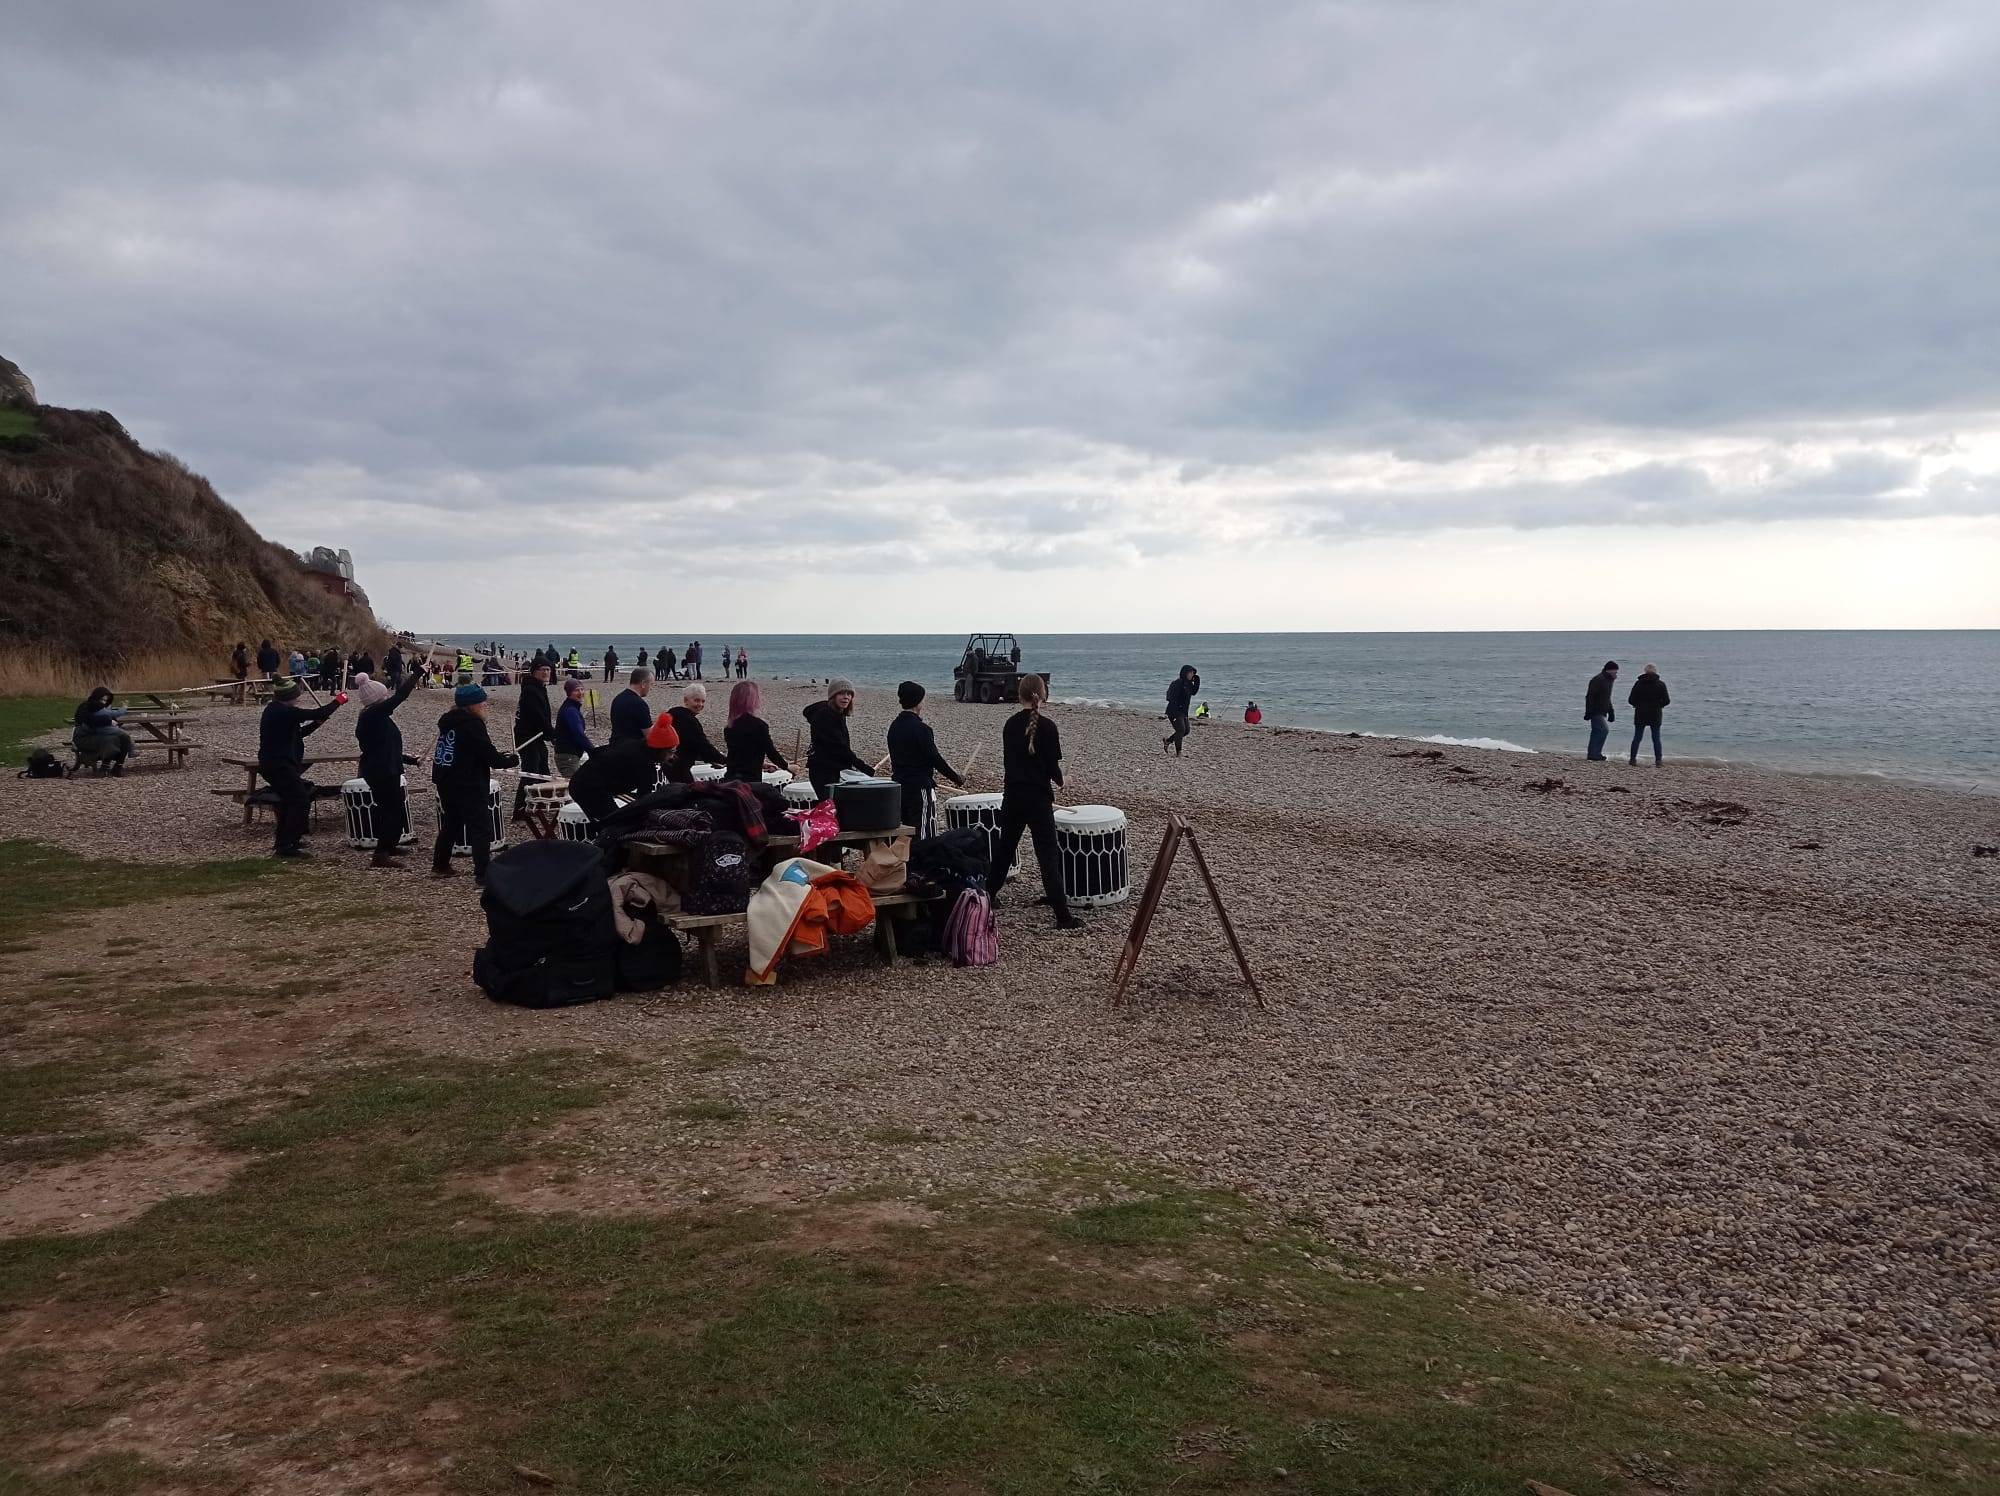 Drums on Branscombe beach. Still a half hour walk through the village from this point to reach the pub!